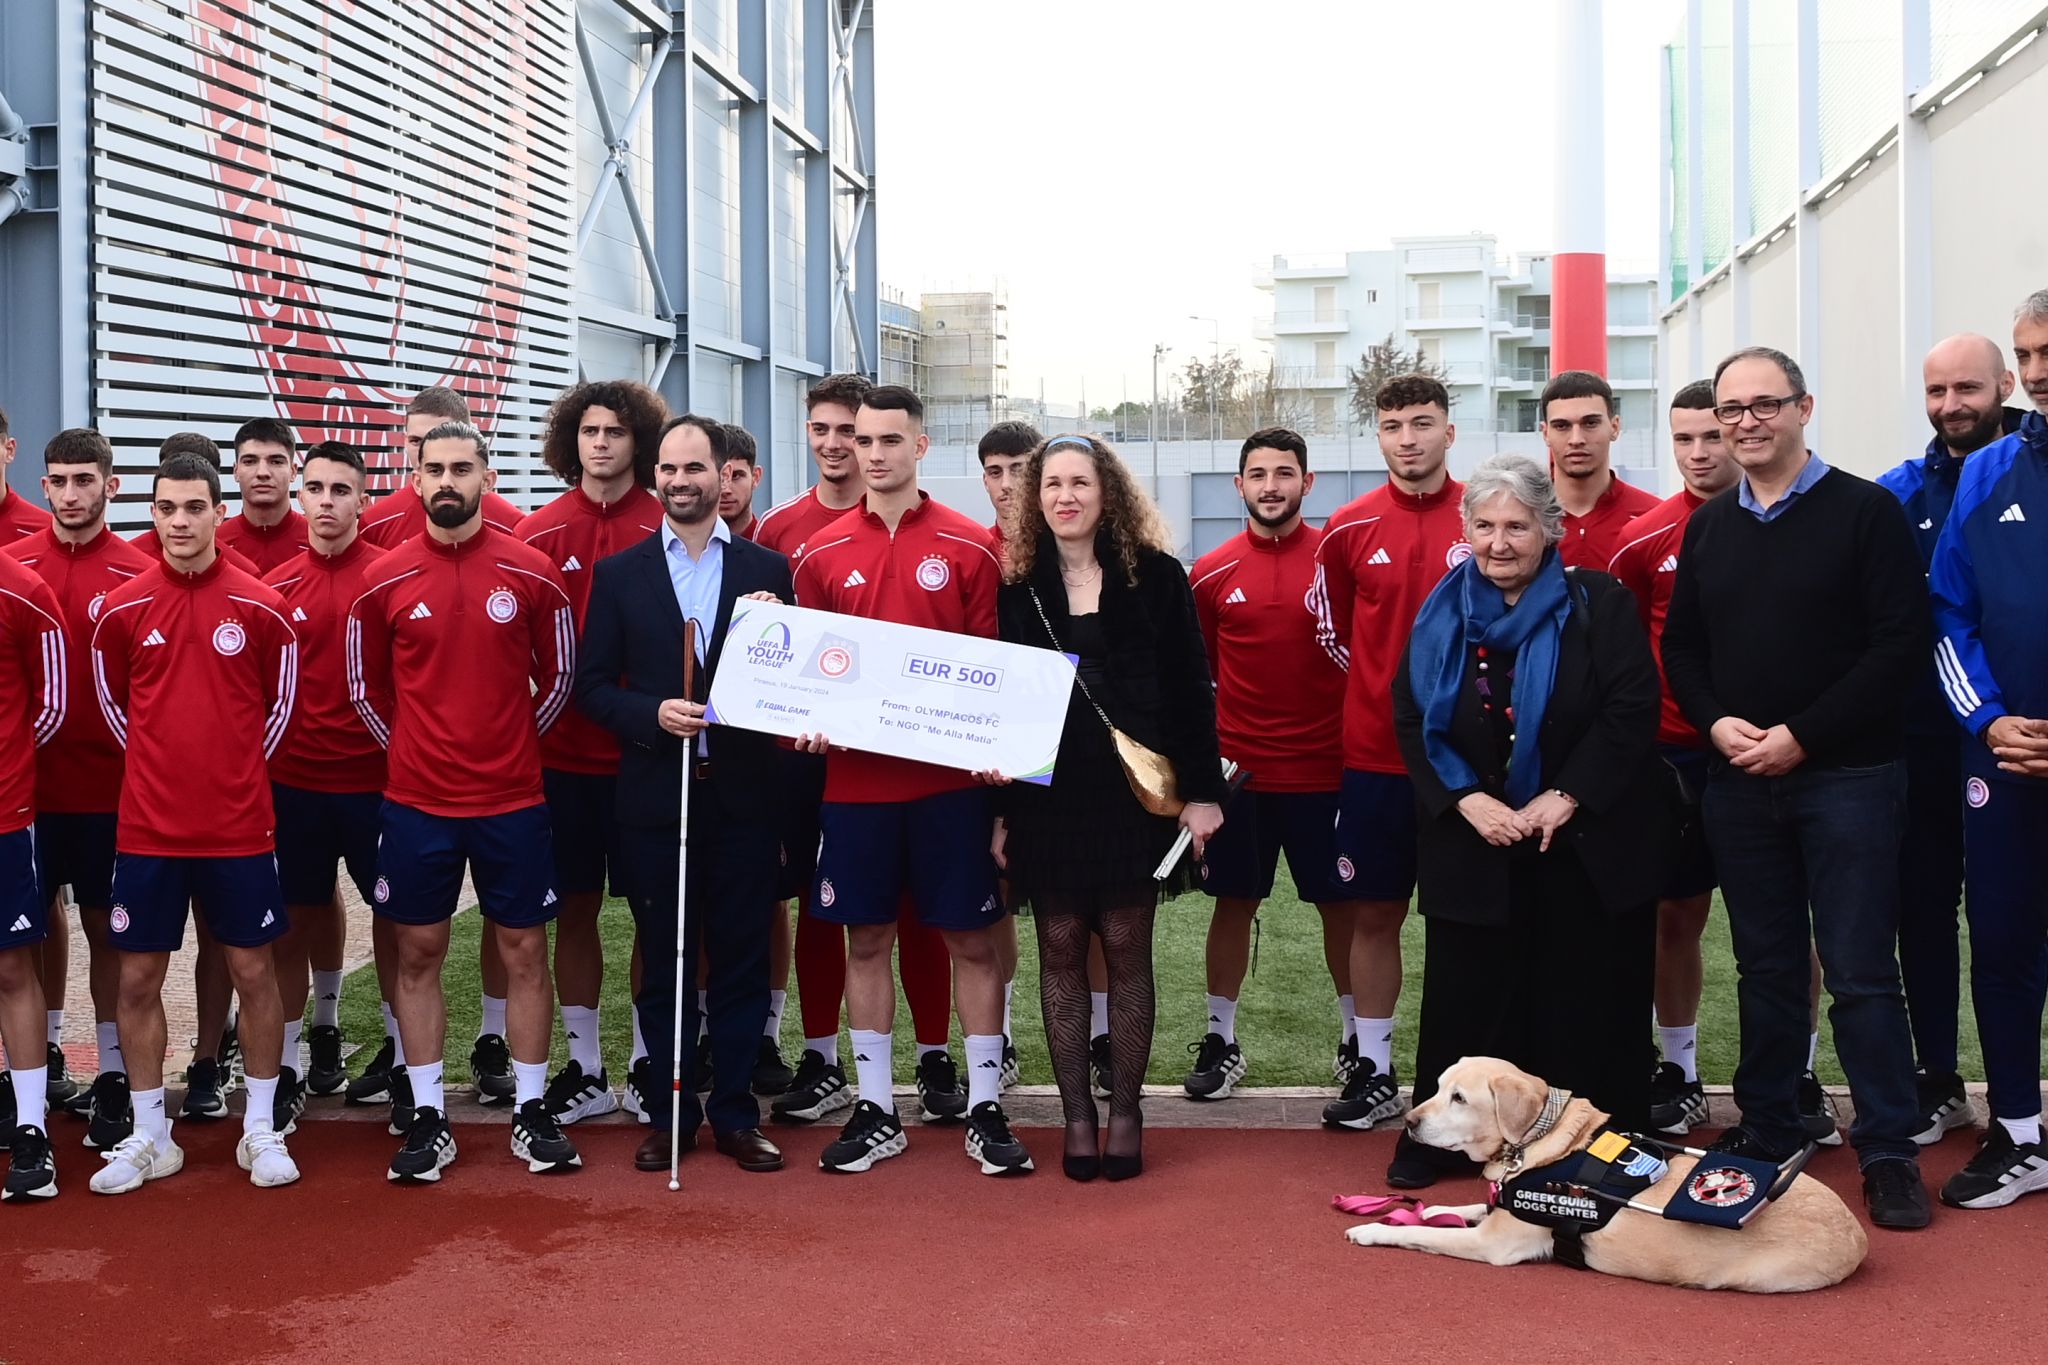 Olympiacos supports the people with visual disabilities